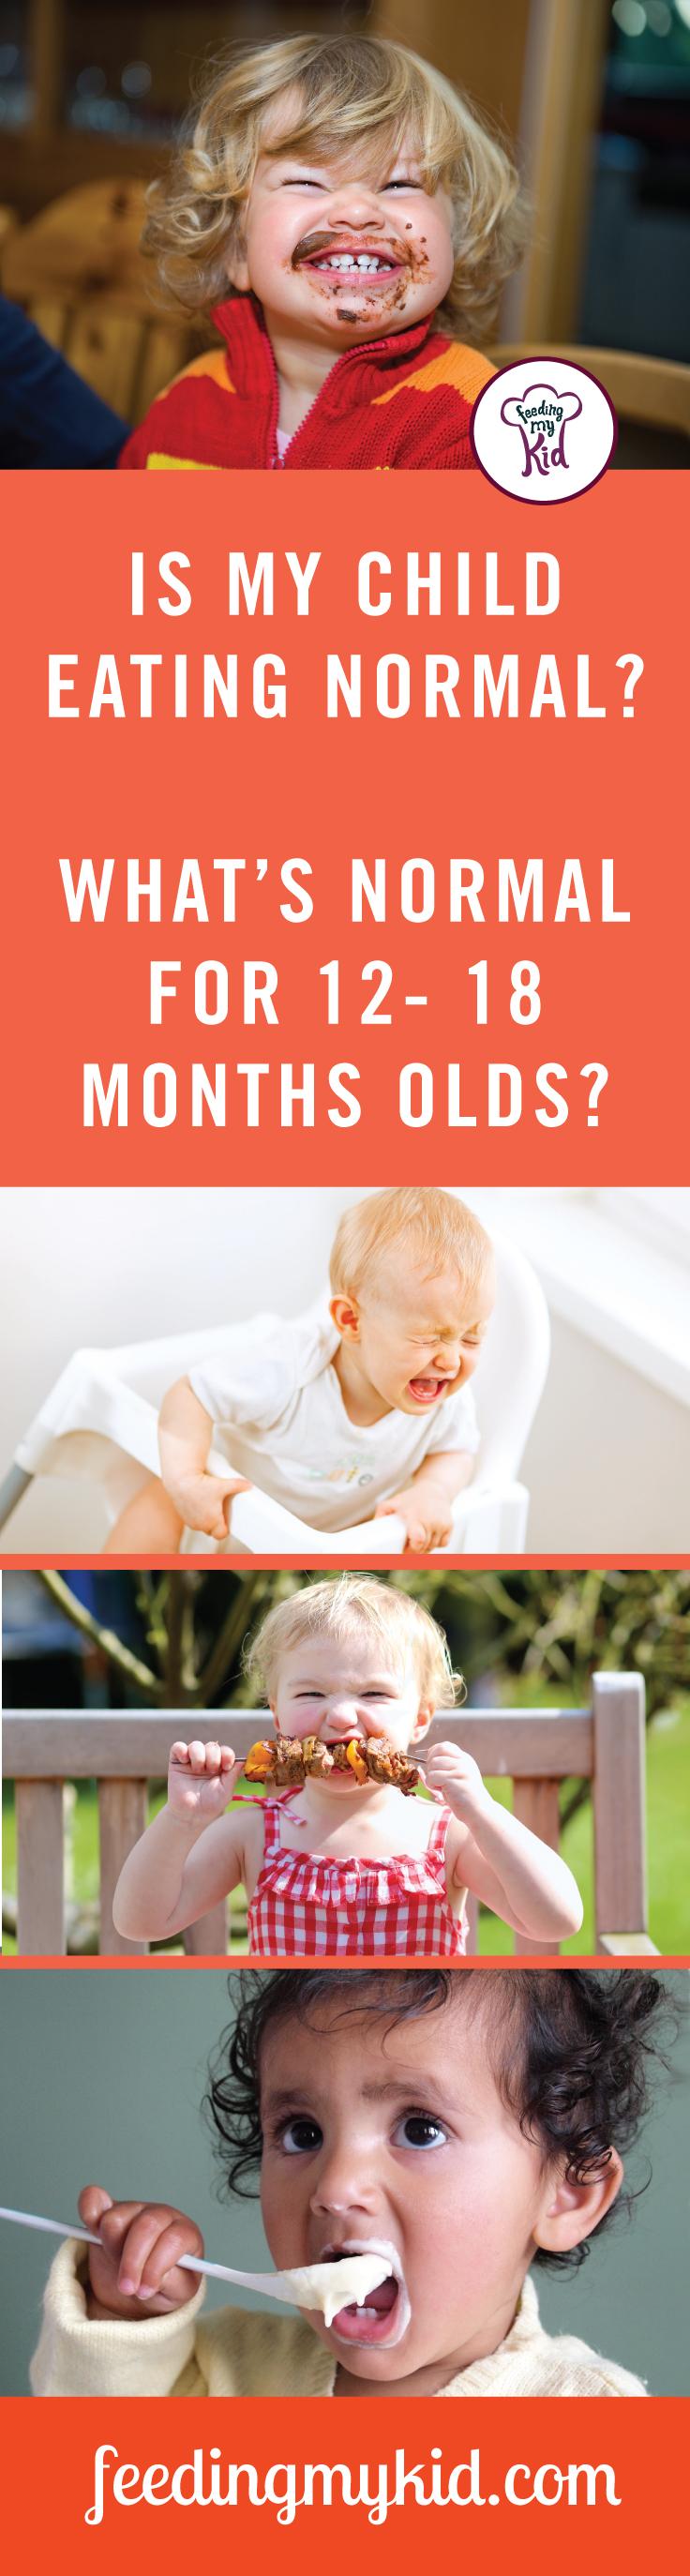 What's normal eating behavior for 12-18 month olds?